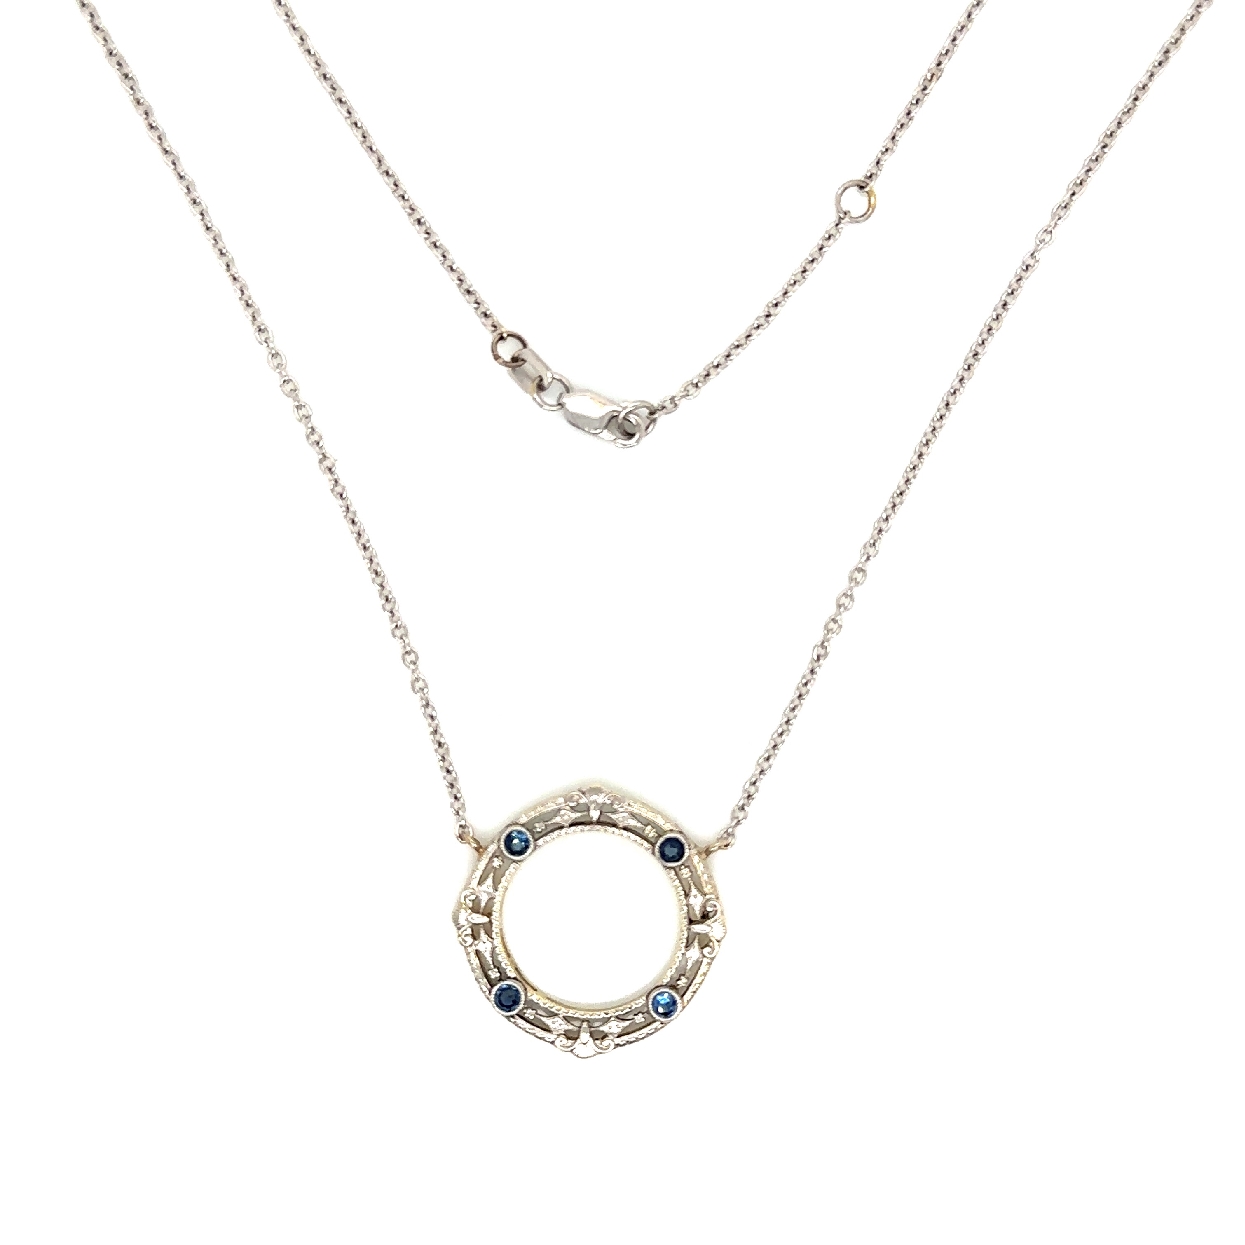 Antique 14K White Gold Circle Pin Conversion Station Necklace With Sapphire Accents; Circa 1910

18 Inches 